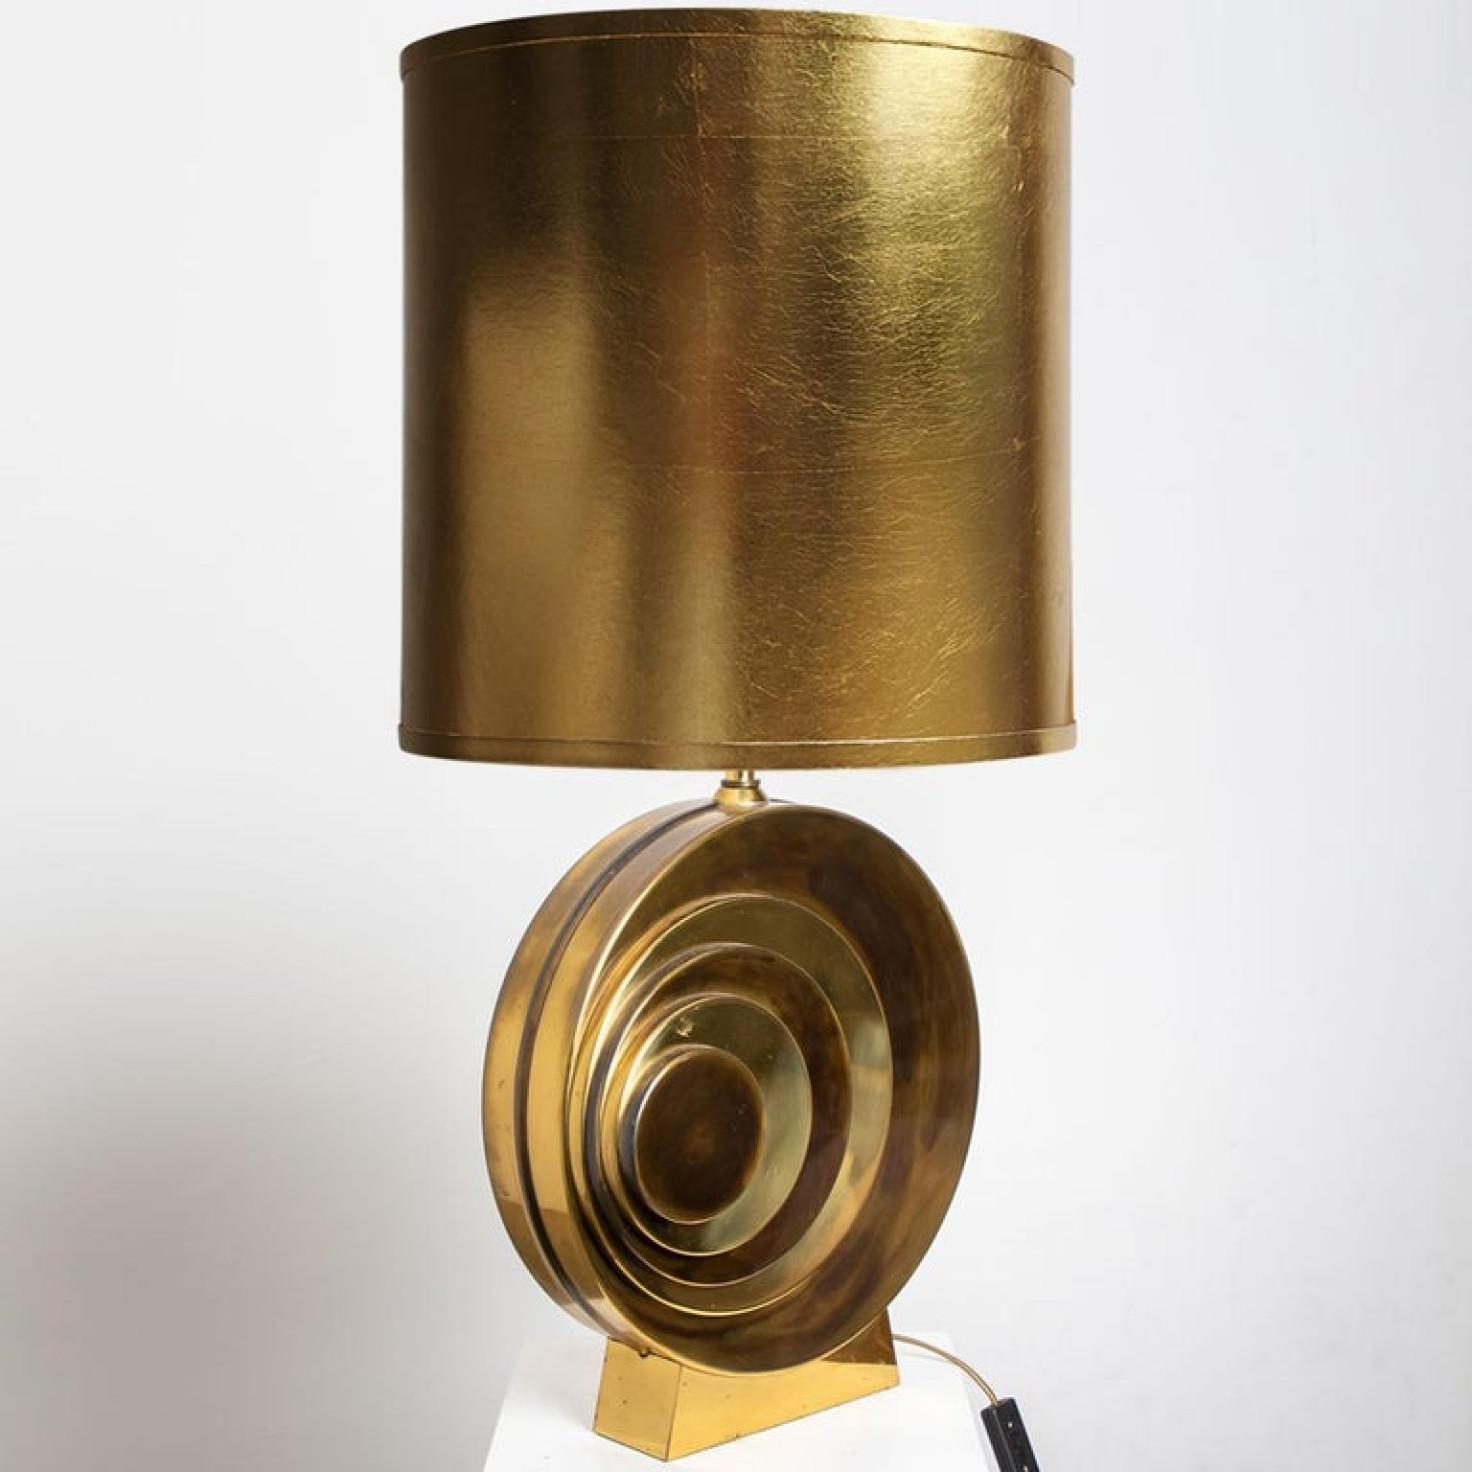 Design Table Lamp with New Custom Made Lamp Shade by Rene Houben, 1960s In Good Condition For Sale In Rijssen, NL